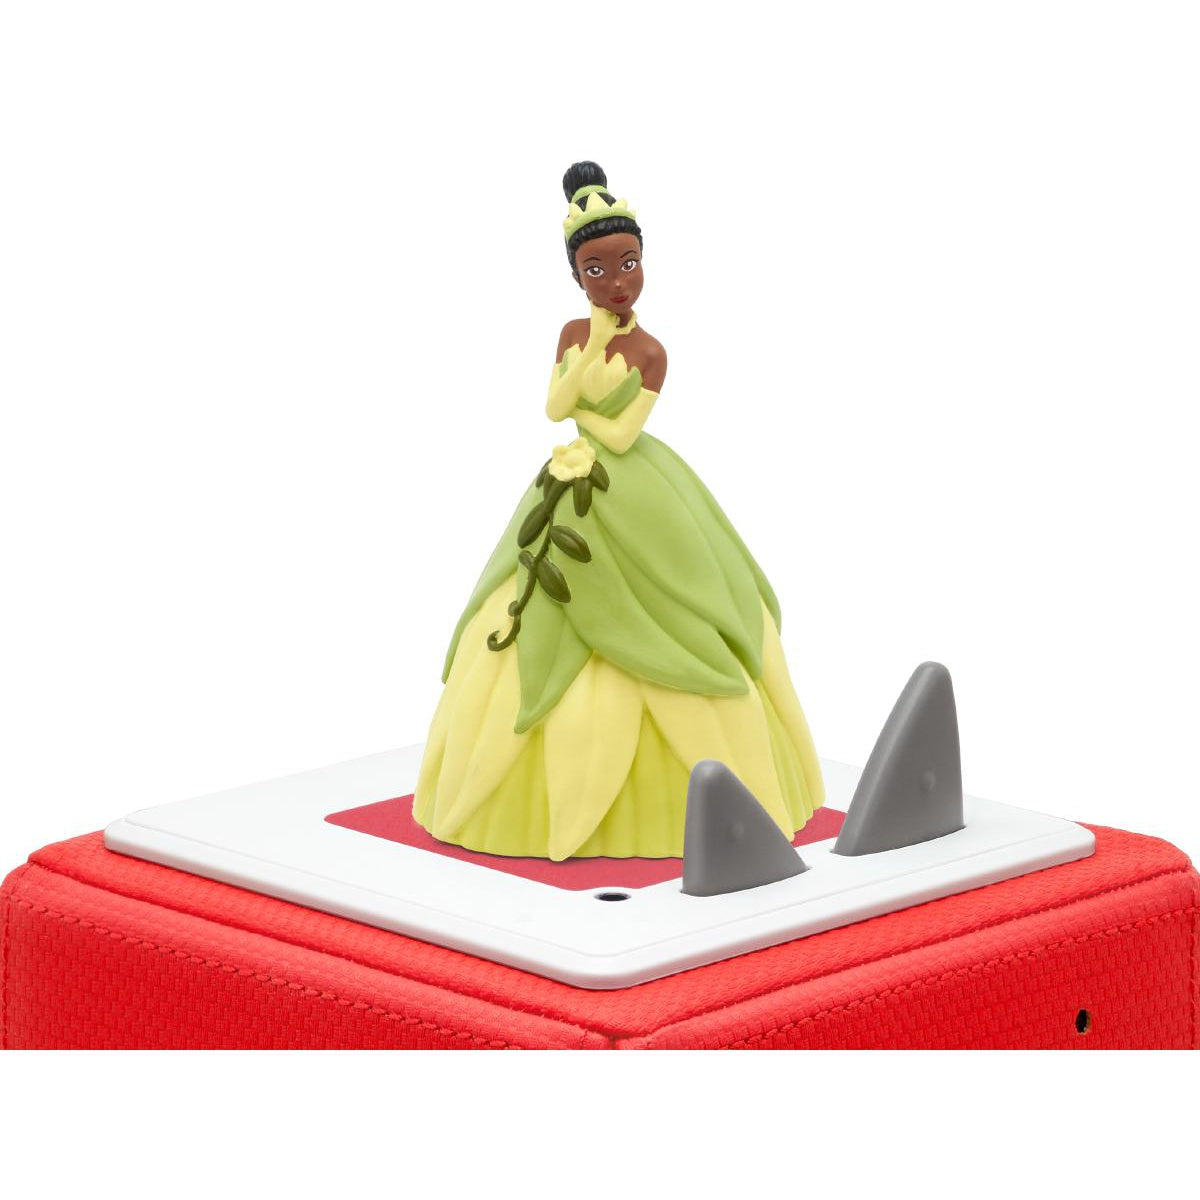 Disney The Princess and the Frog Tonie Figure